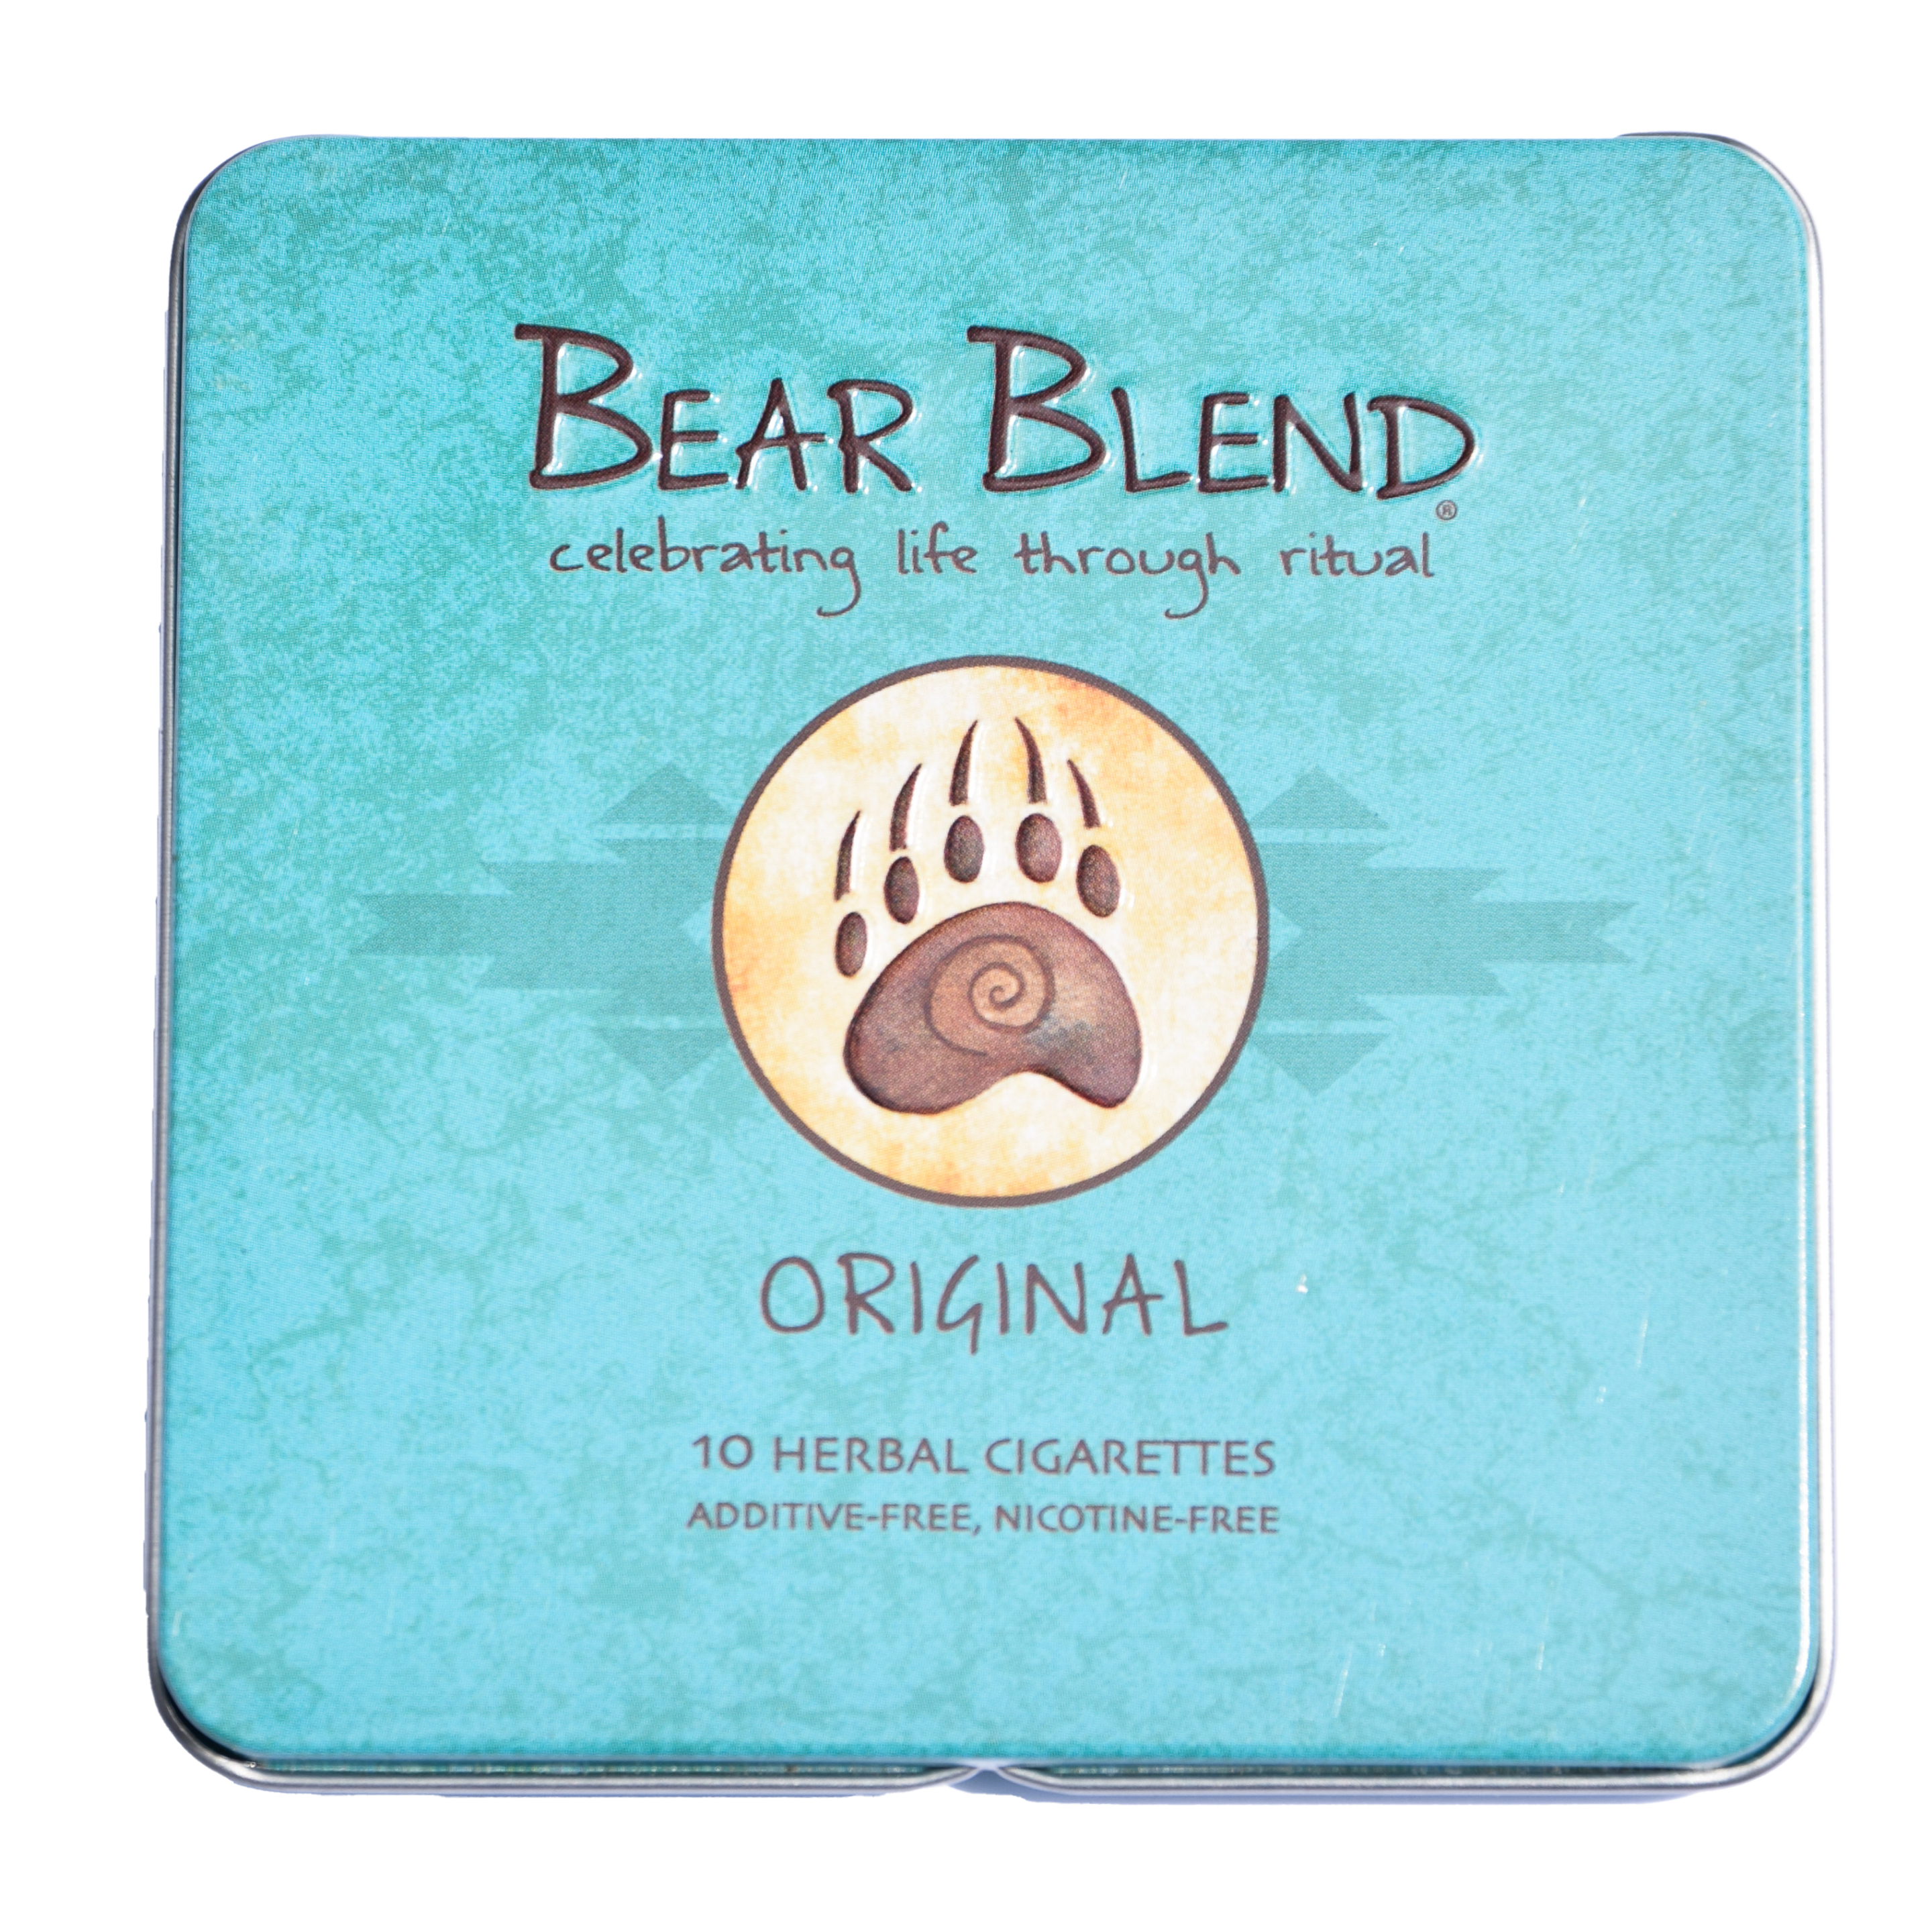 Clear Mind Roll Your Own Herbal Smoking Blend or Tea – Brown Bear Herbs